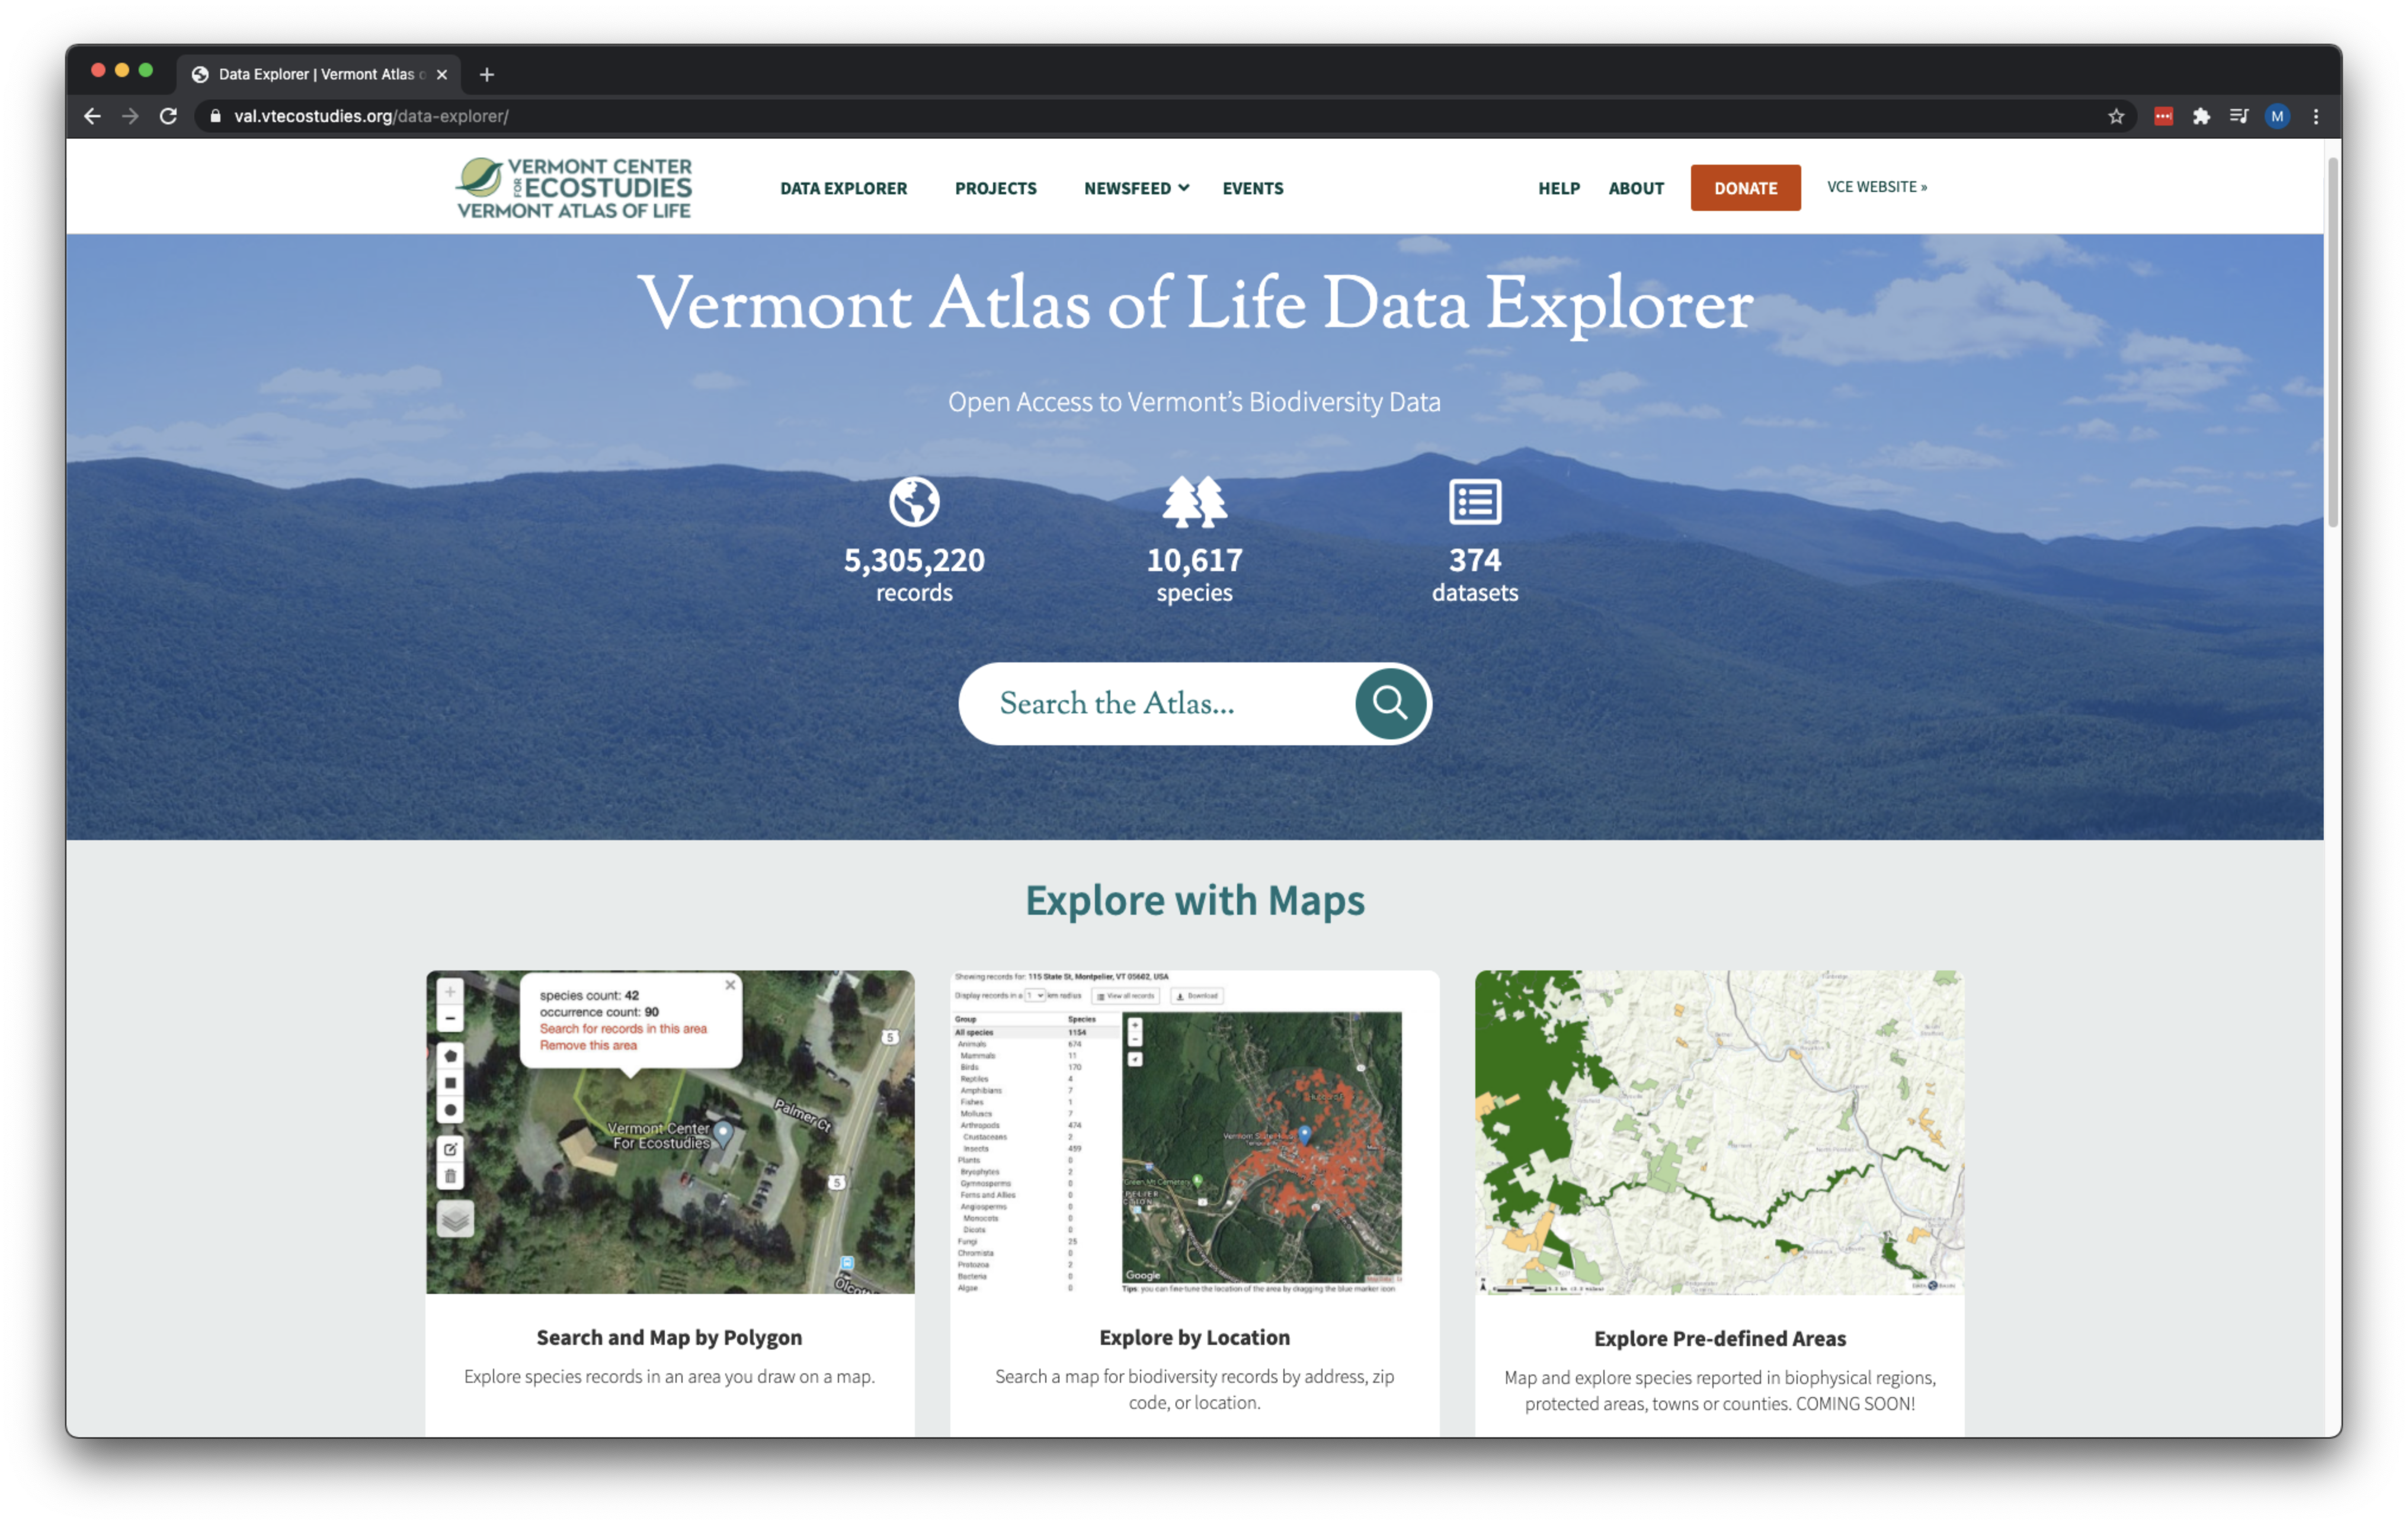 The Vermont Atlas of Life (VAL) - Vermont Center for Ecostudies